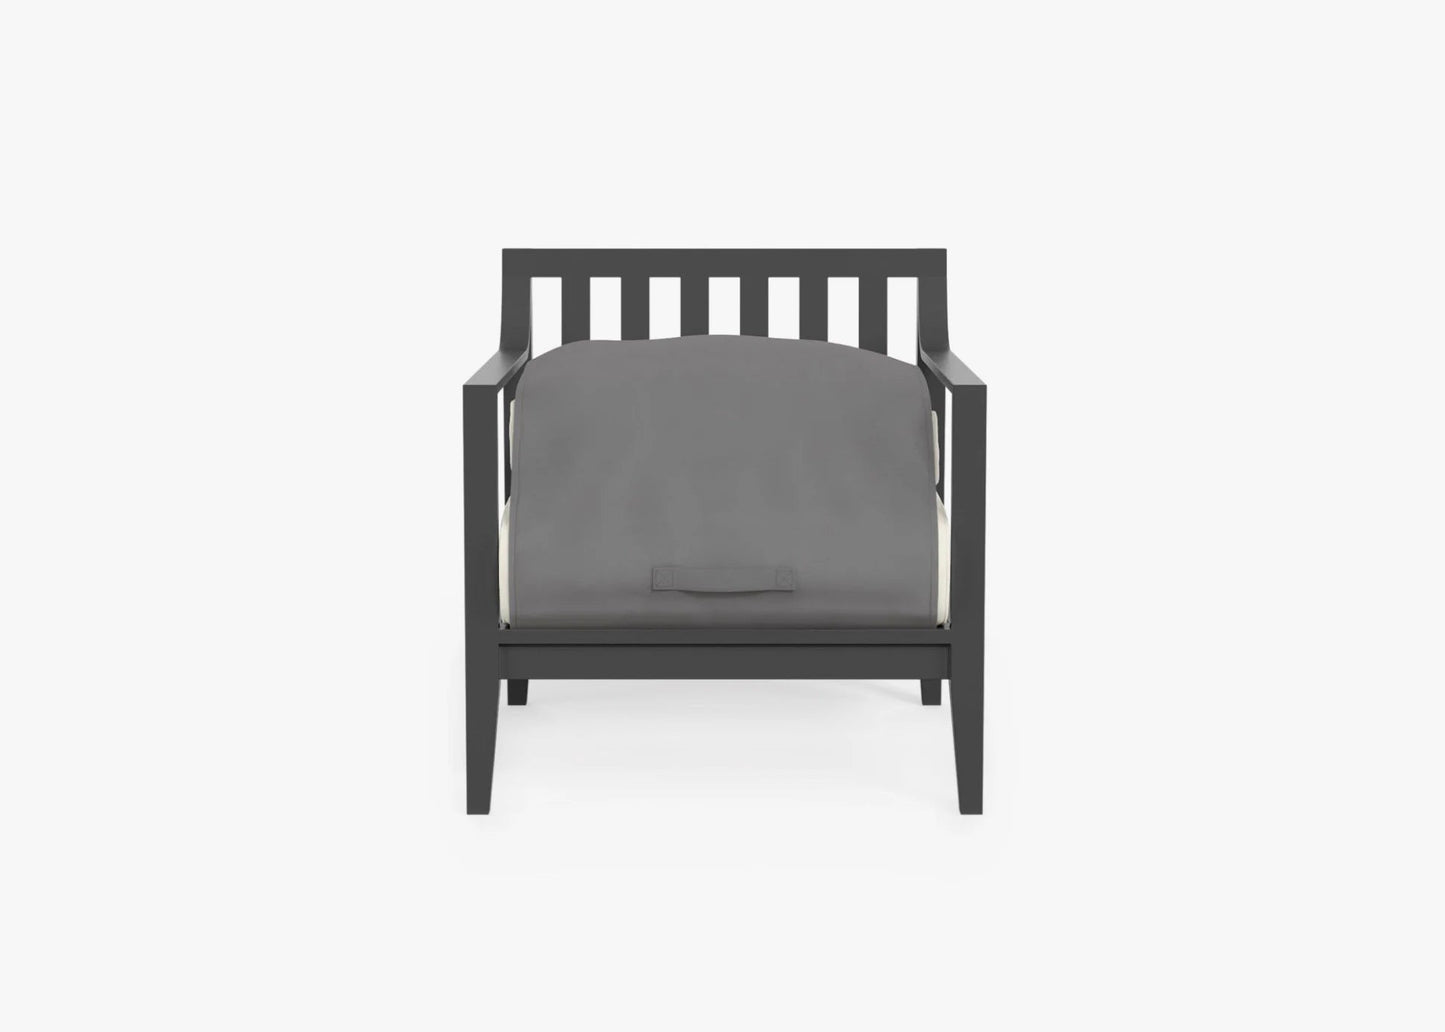 Live Outer 27" Charcoal Aluminum Outdoor Armchair With Palisades Cream Cushion